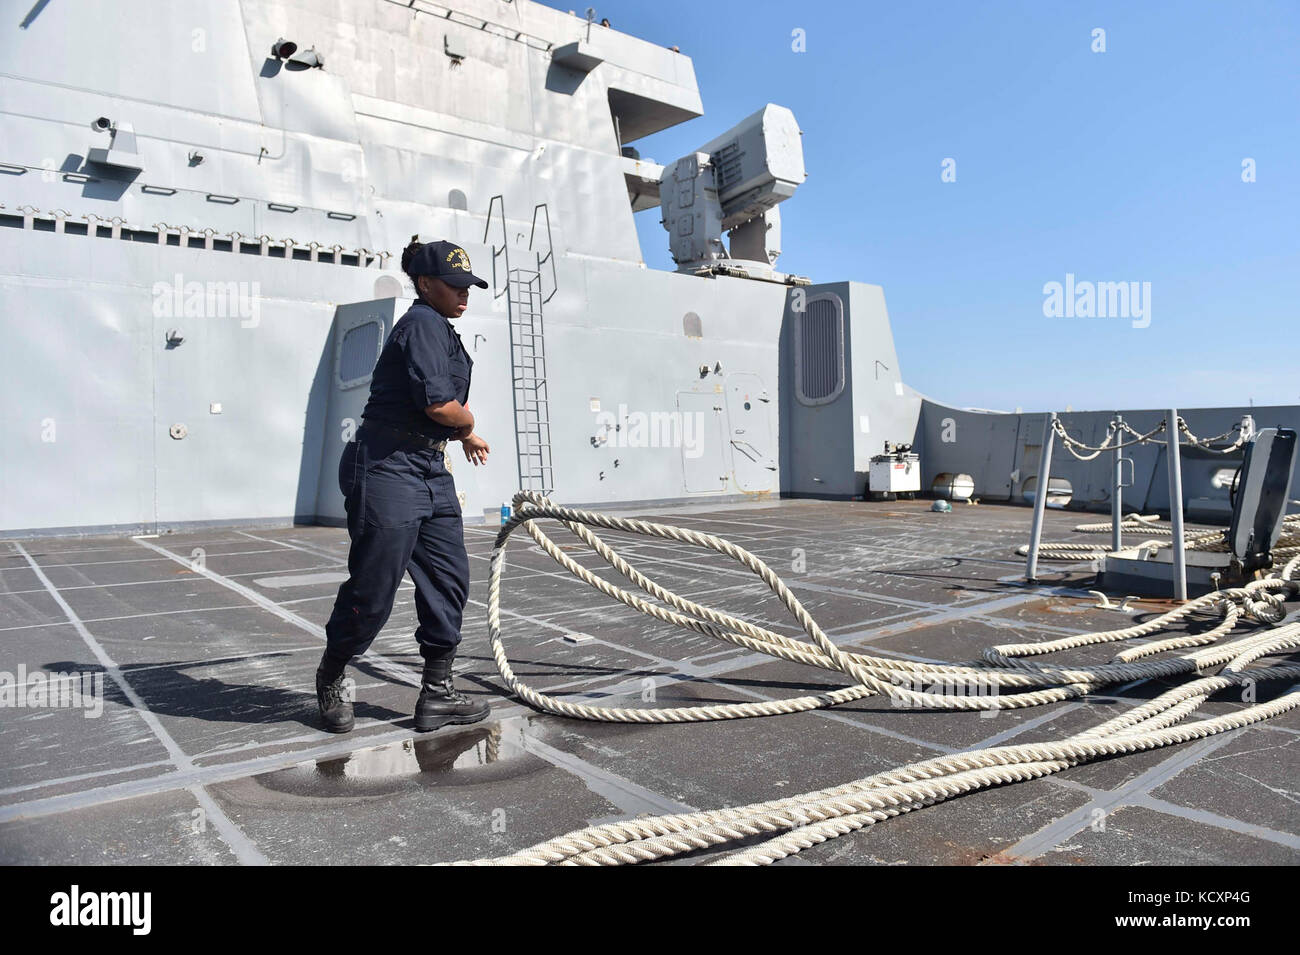 171007-N-PC620-0028  MAYPORT, Fla. (Oct. 7, 2017) Seaman Chanell McCray, a native of Newark, New Jersey, handles line during a sea-and-anchor evolution aboard the amphibious transport dock ship USS New York (LPD 21). New York departed Naval Station Mayport, Florida, to support the Gulf coast region in the event assistance is needed in the wake of Hurricane Nate. (U.S. Navy photo by Mass Communication Specialist Seaman Michael Lehman/Released) Stock Photo